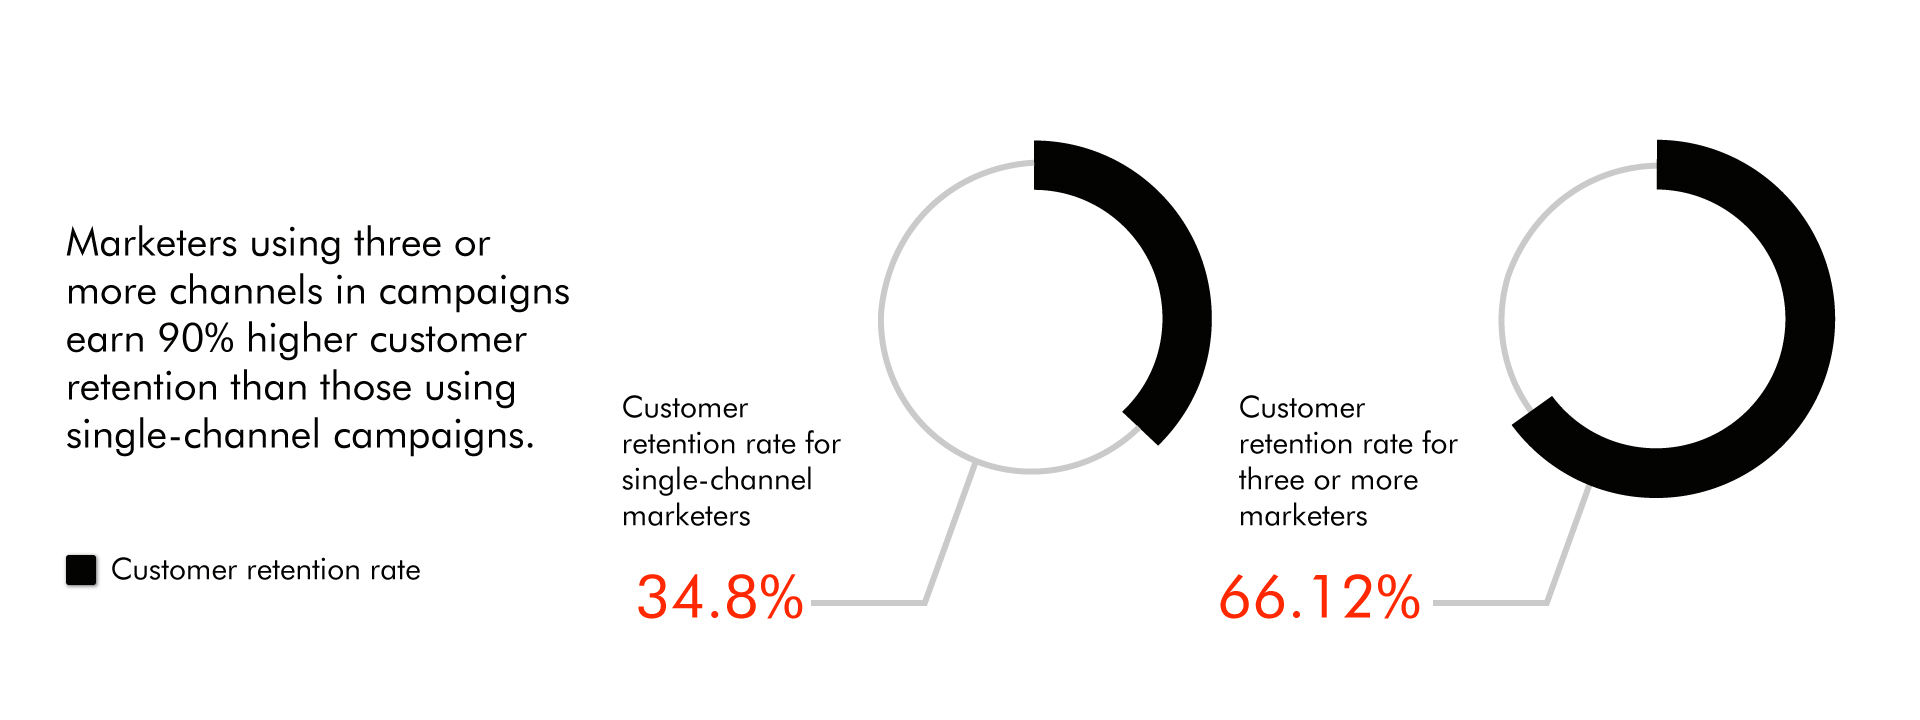 The study below noted the customer retention rates for different brands that used an omnichannel marketing strategy vs. those that focused on a single channel.